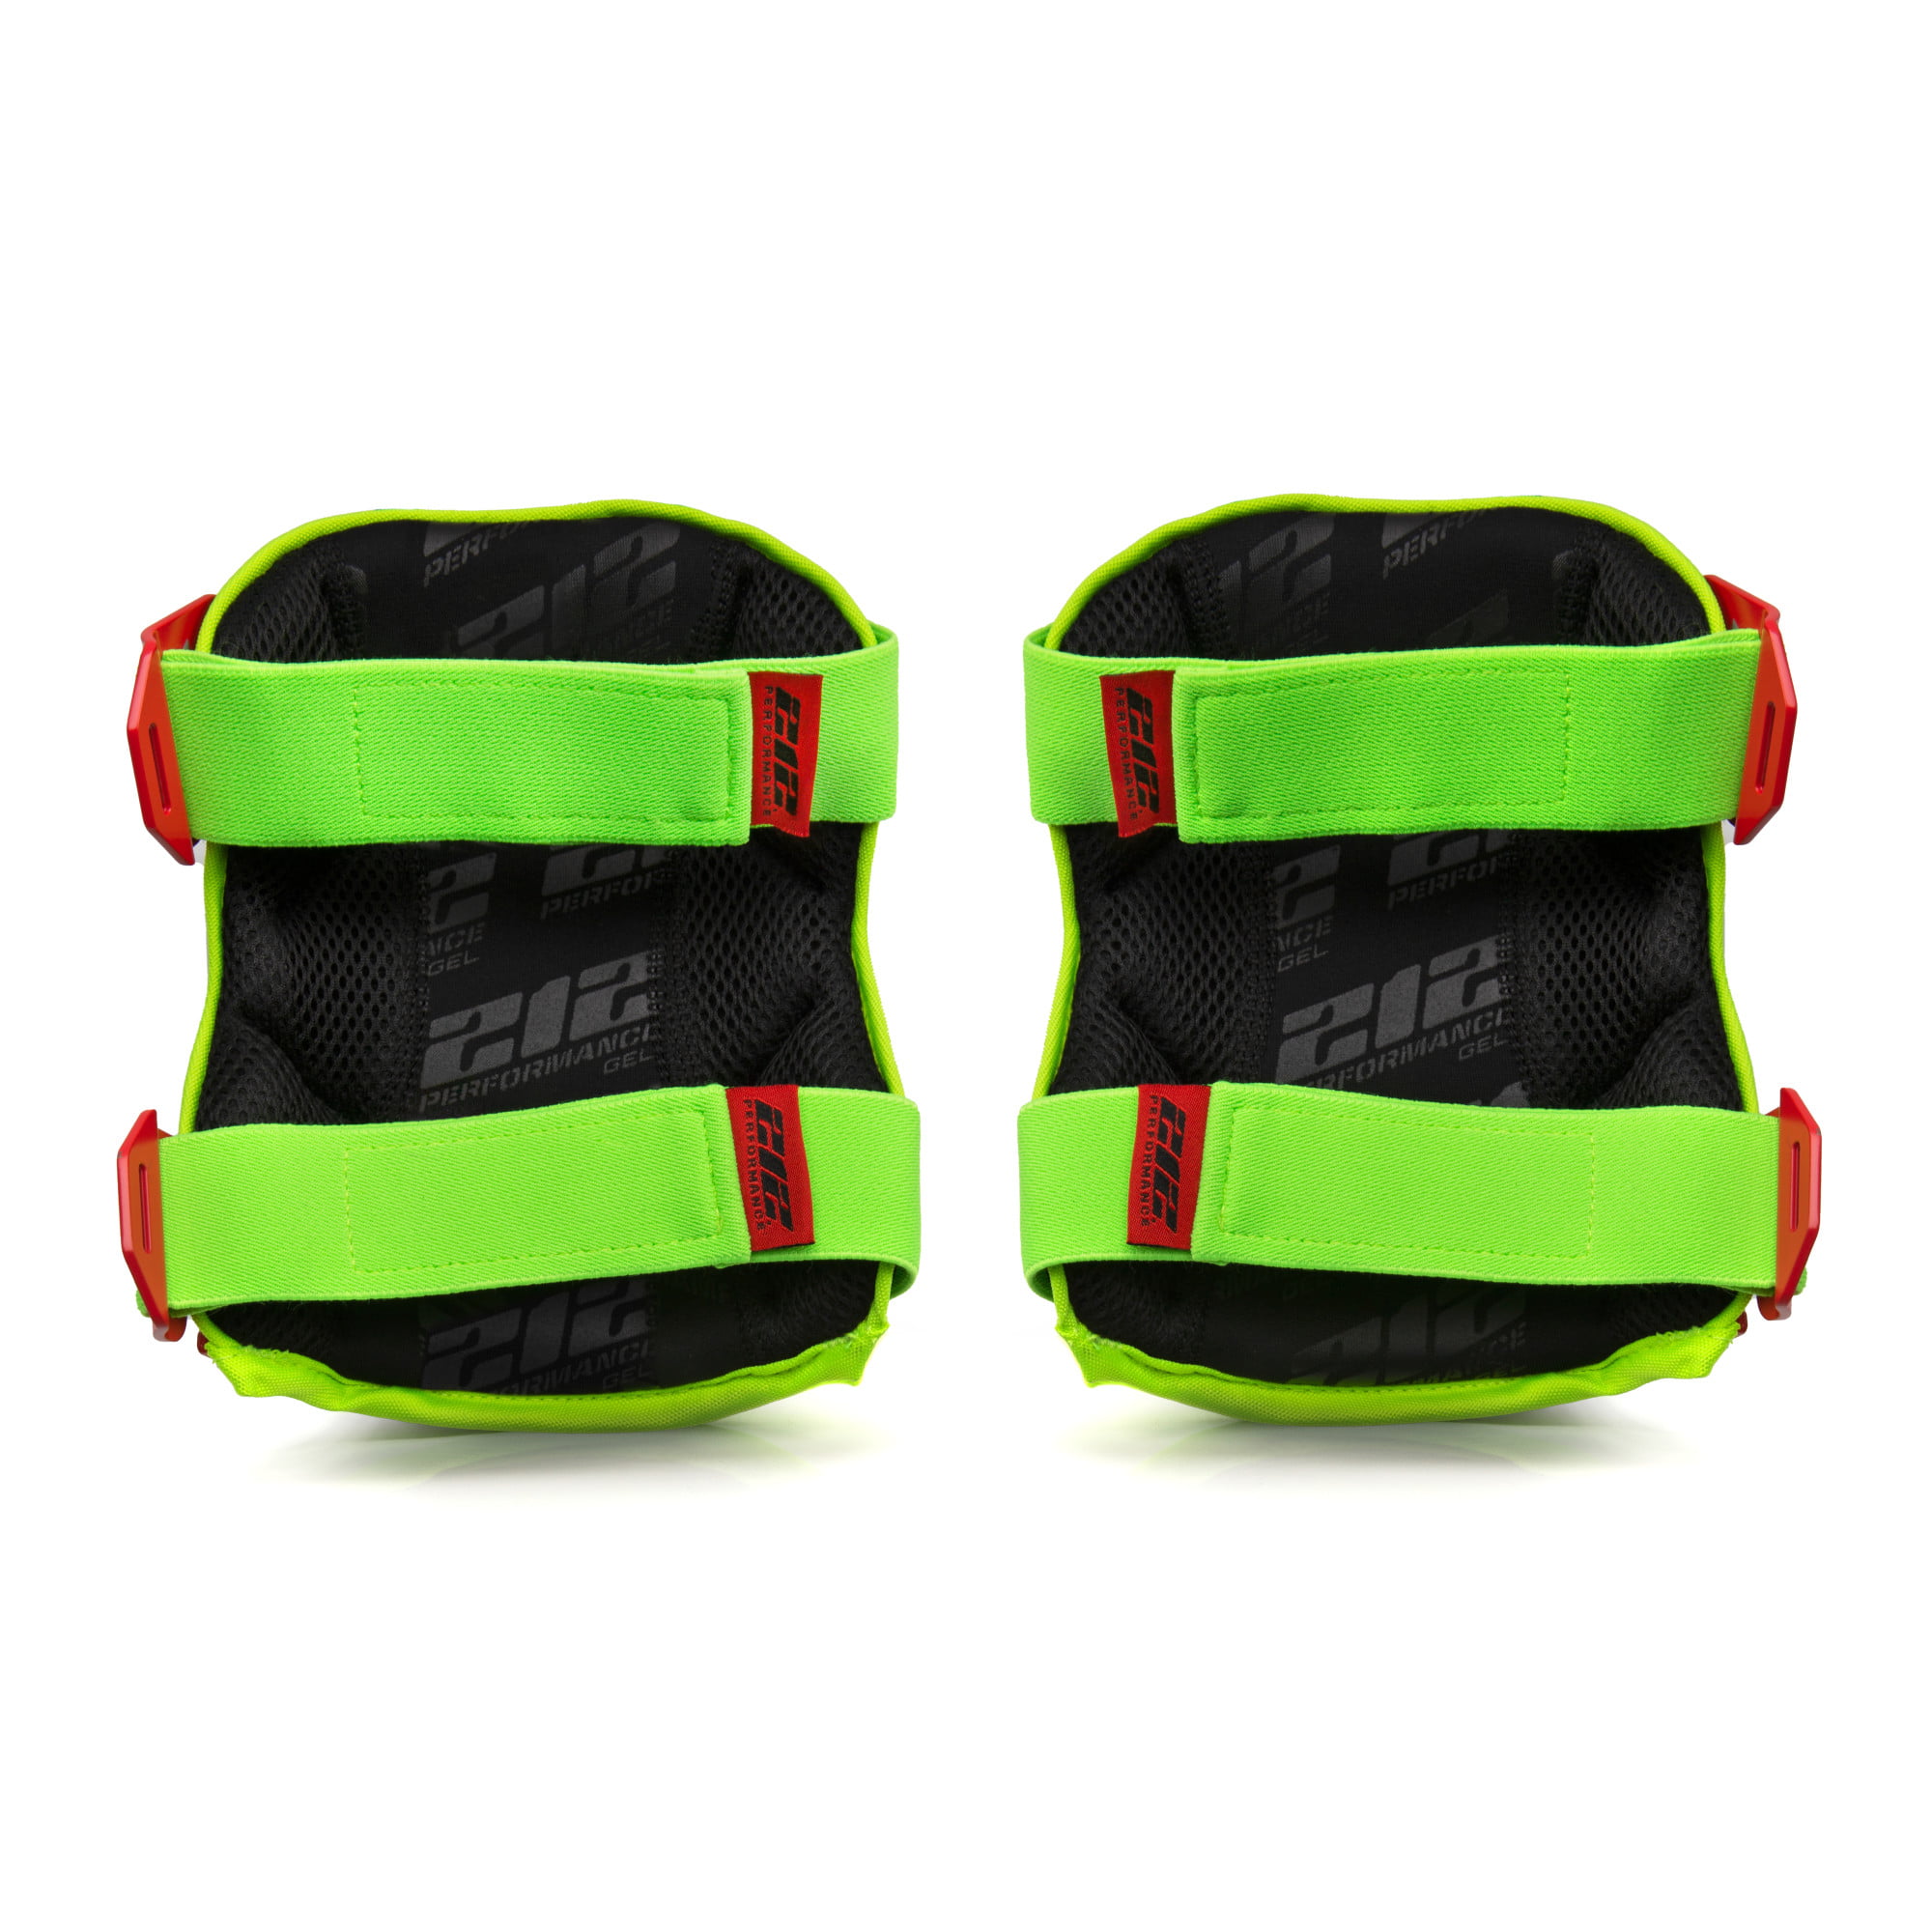 212 Performance Breathable Mesh Gel Core Foam Knee Pads Upper Thigh Support GTSK 